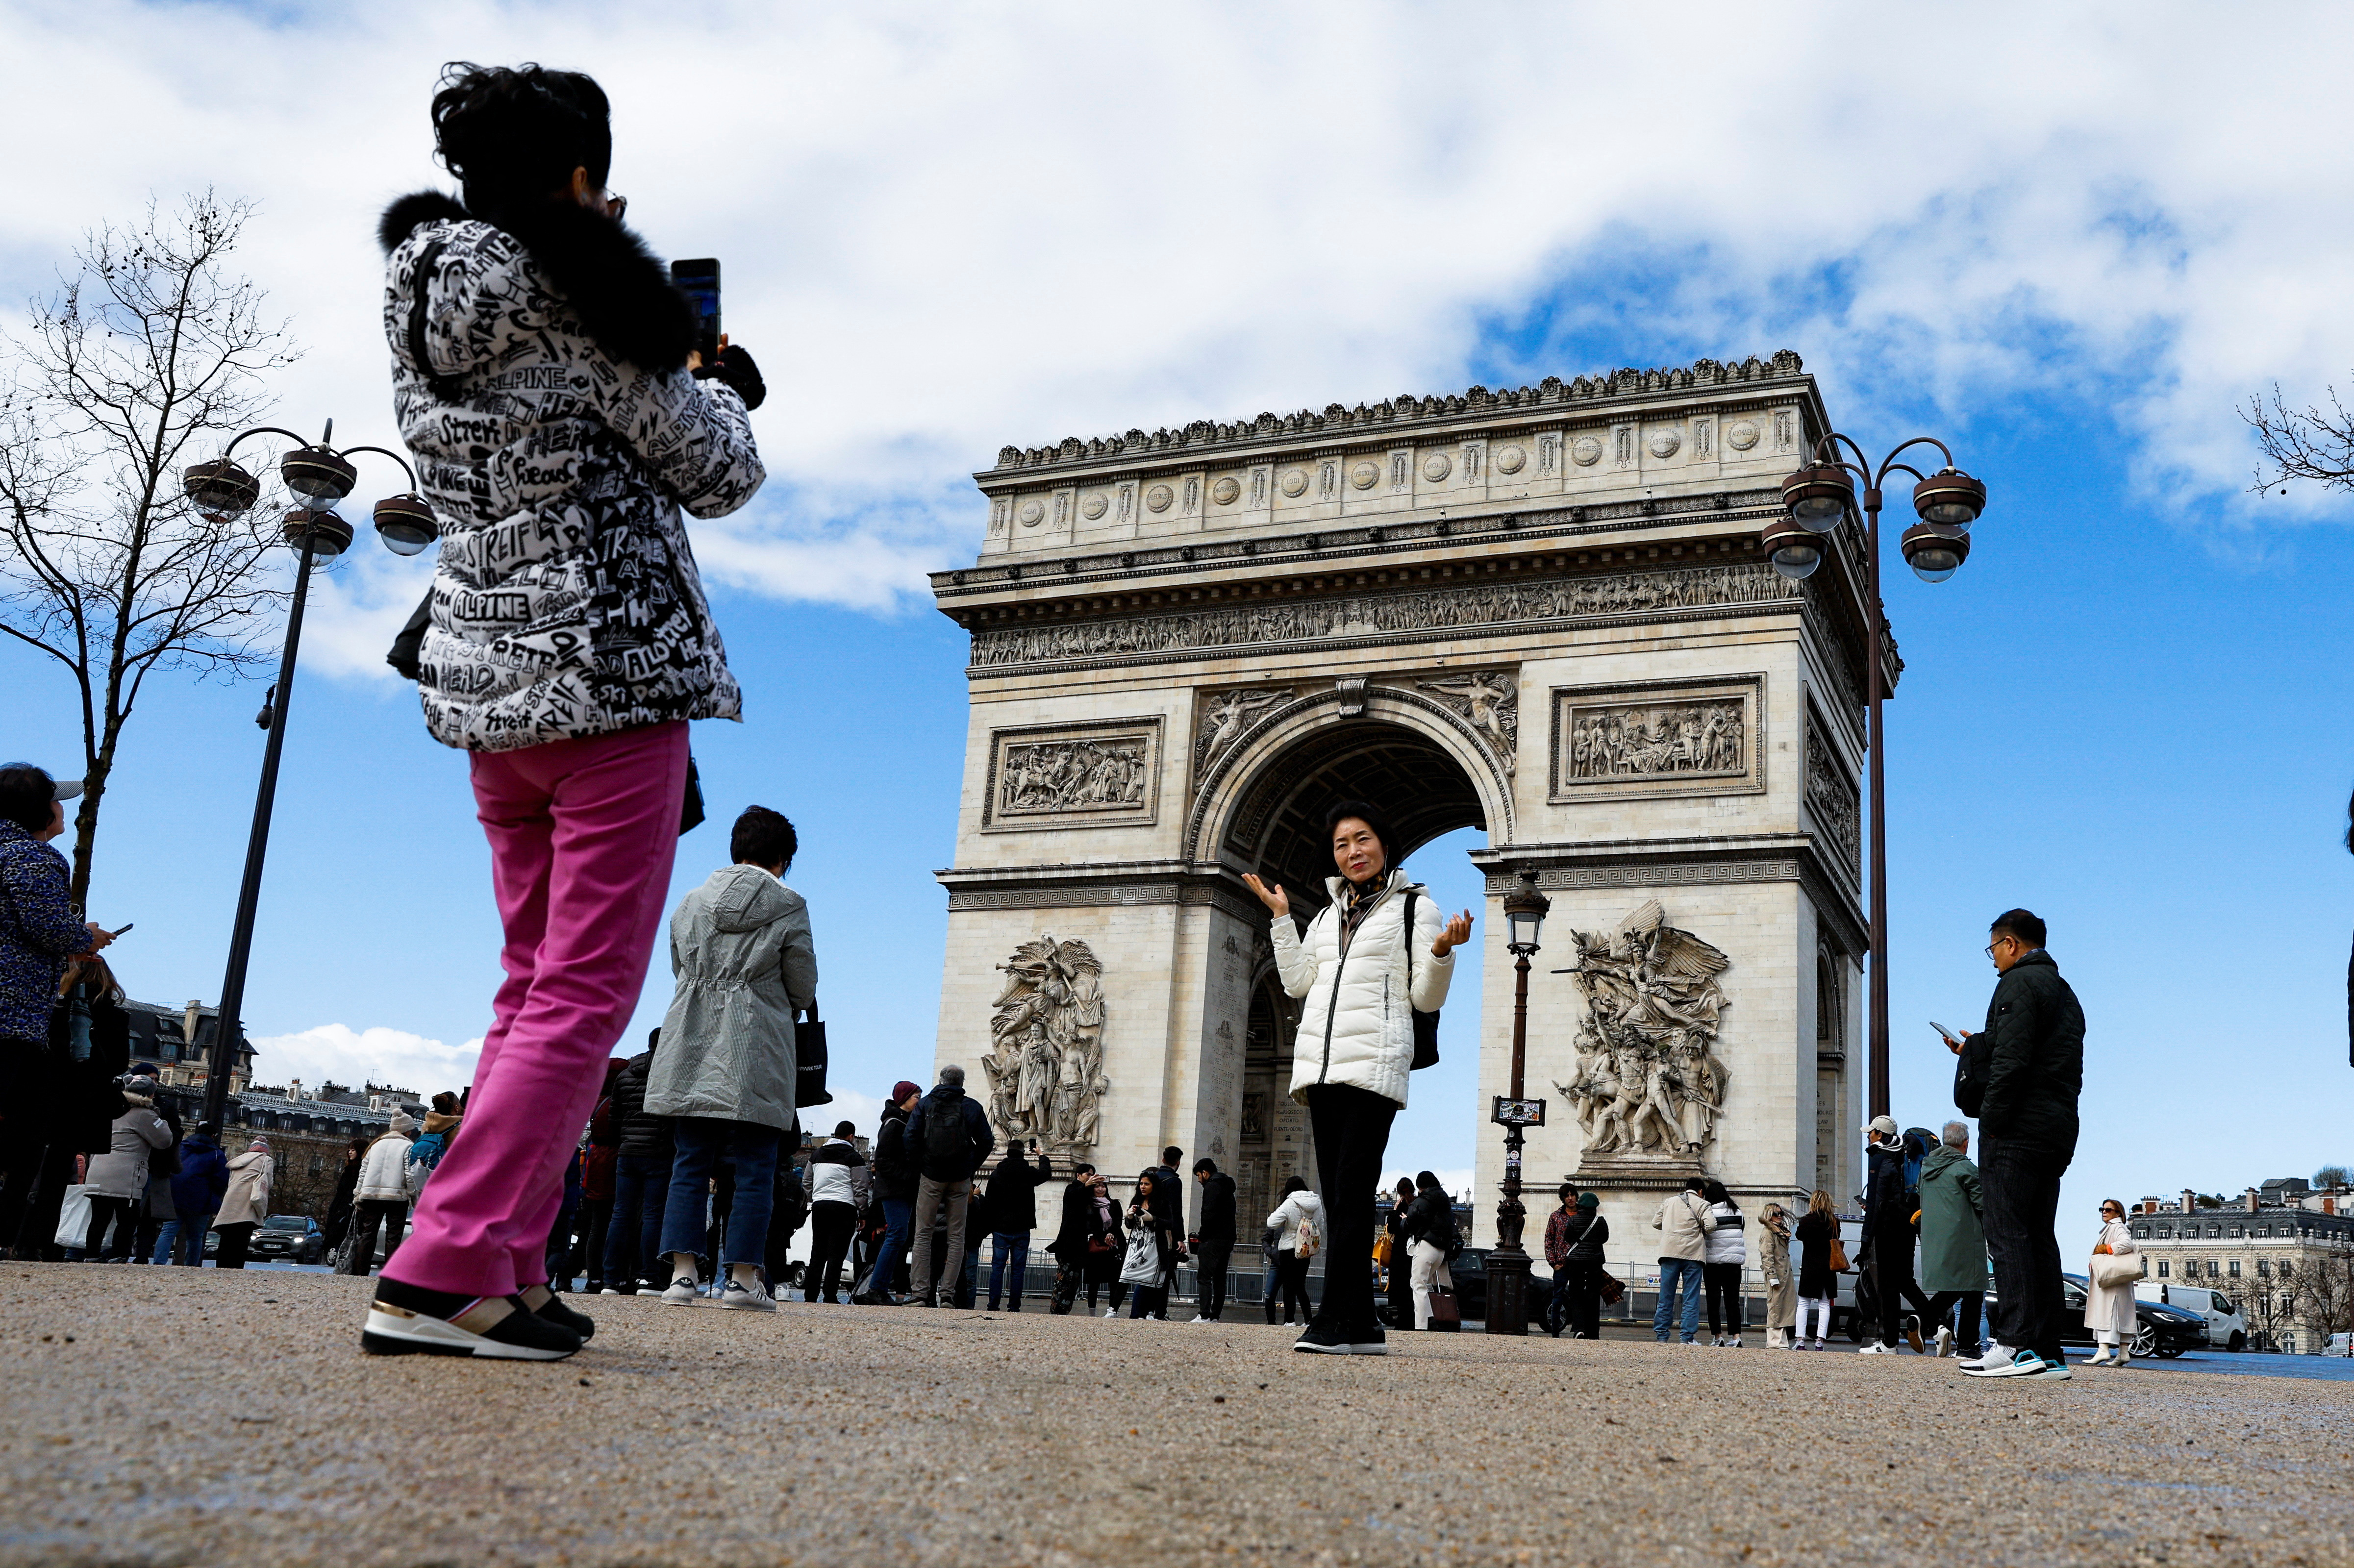 Europe hopes for busy summer return despite Chinese tourists growing dimmer